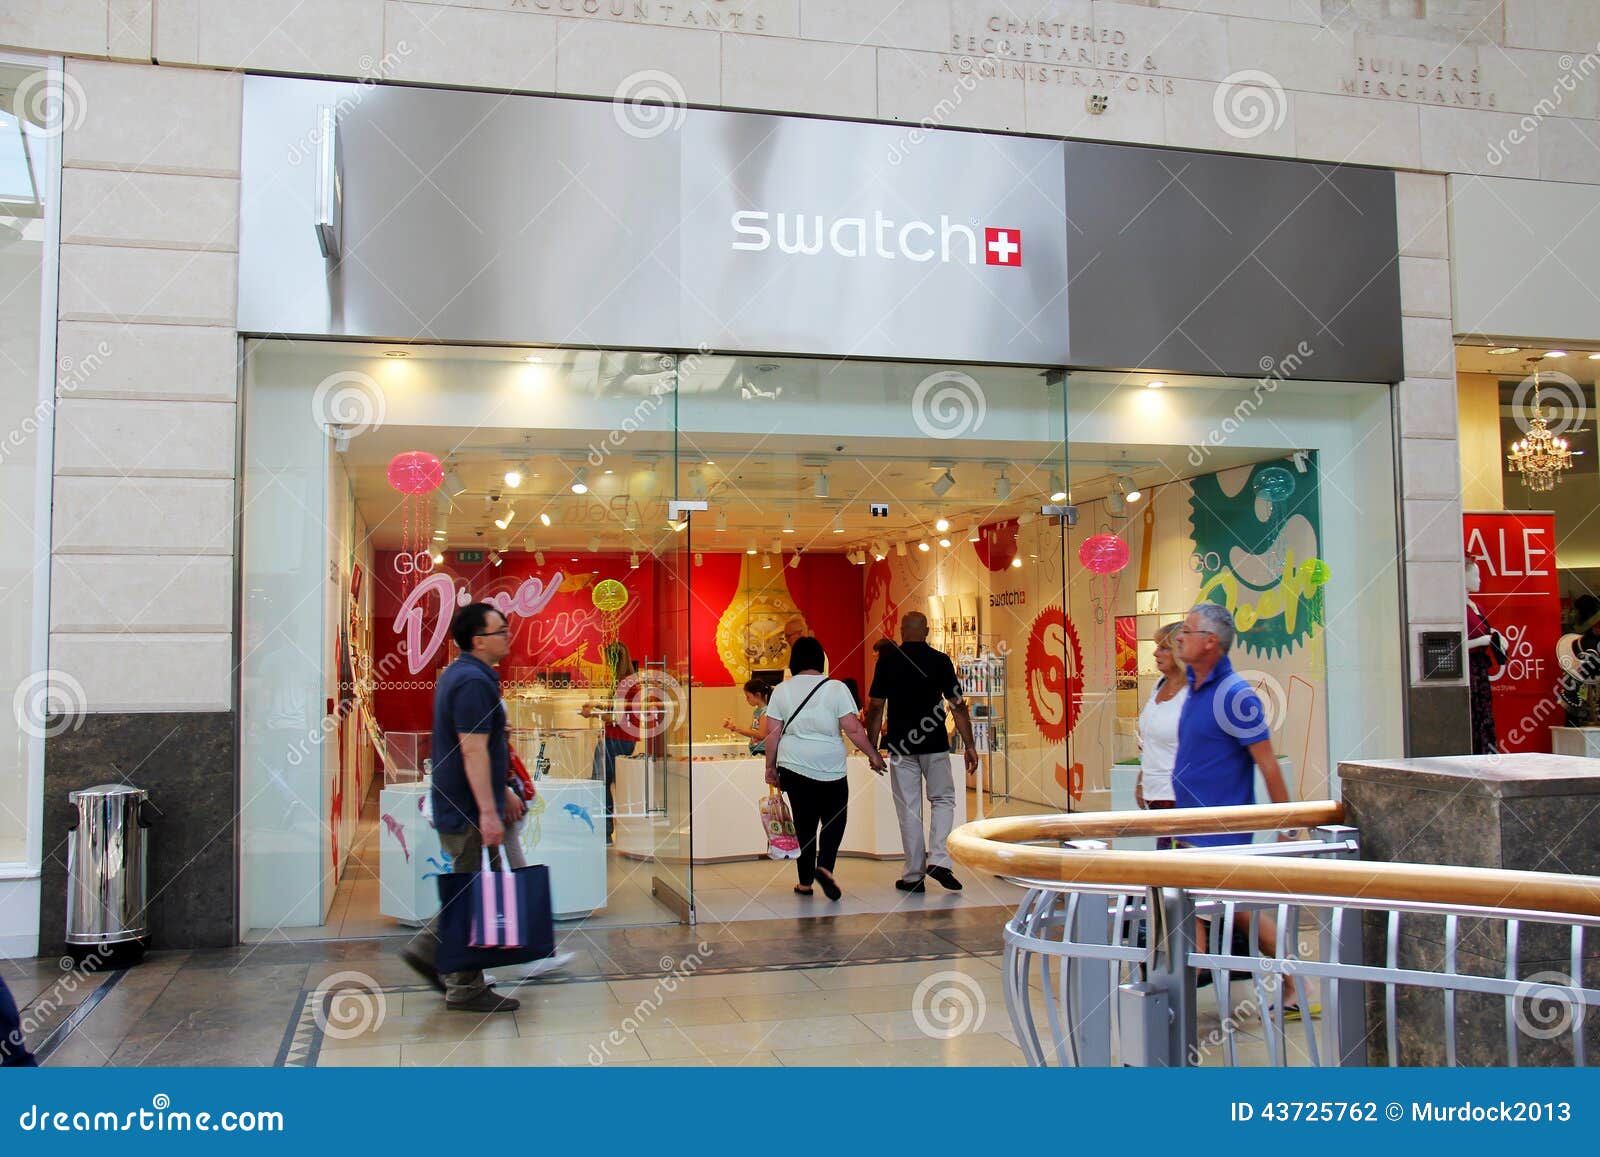 Shopping centre London editorial stock image. Image of stores